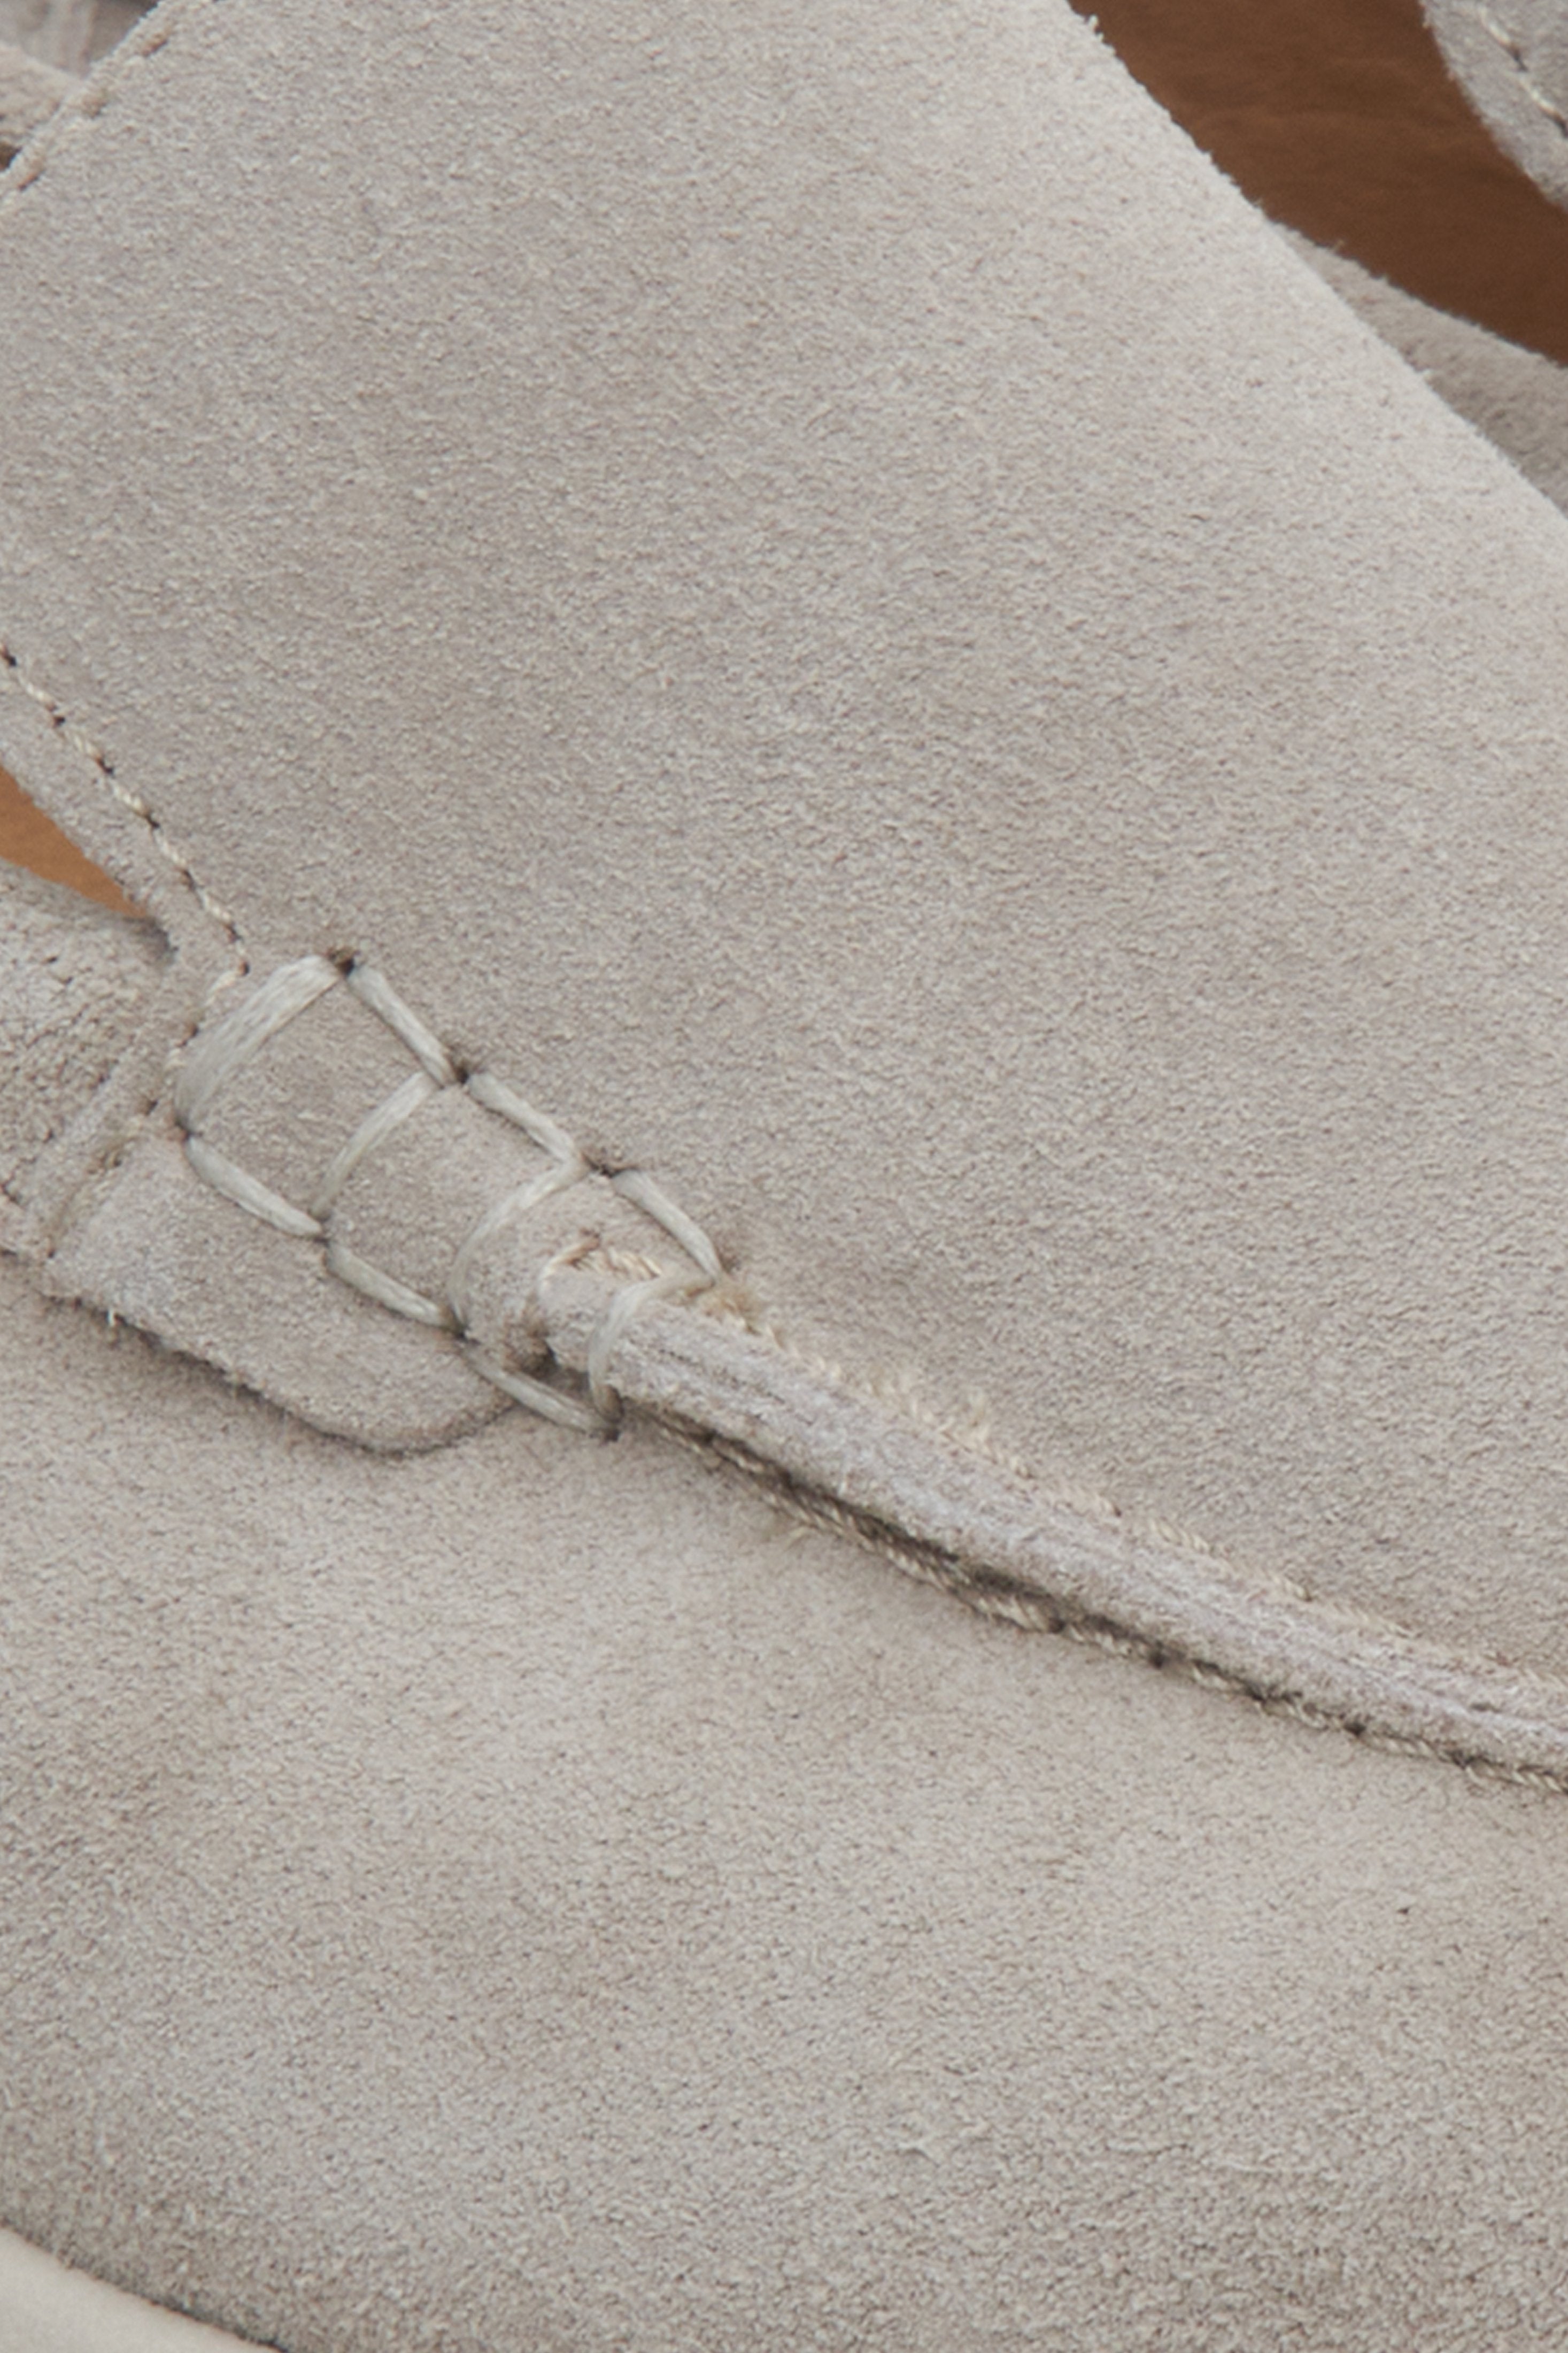 Women's loafers in light grey velour - close-up on details.